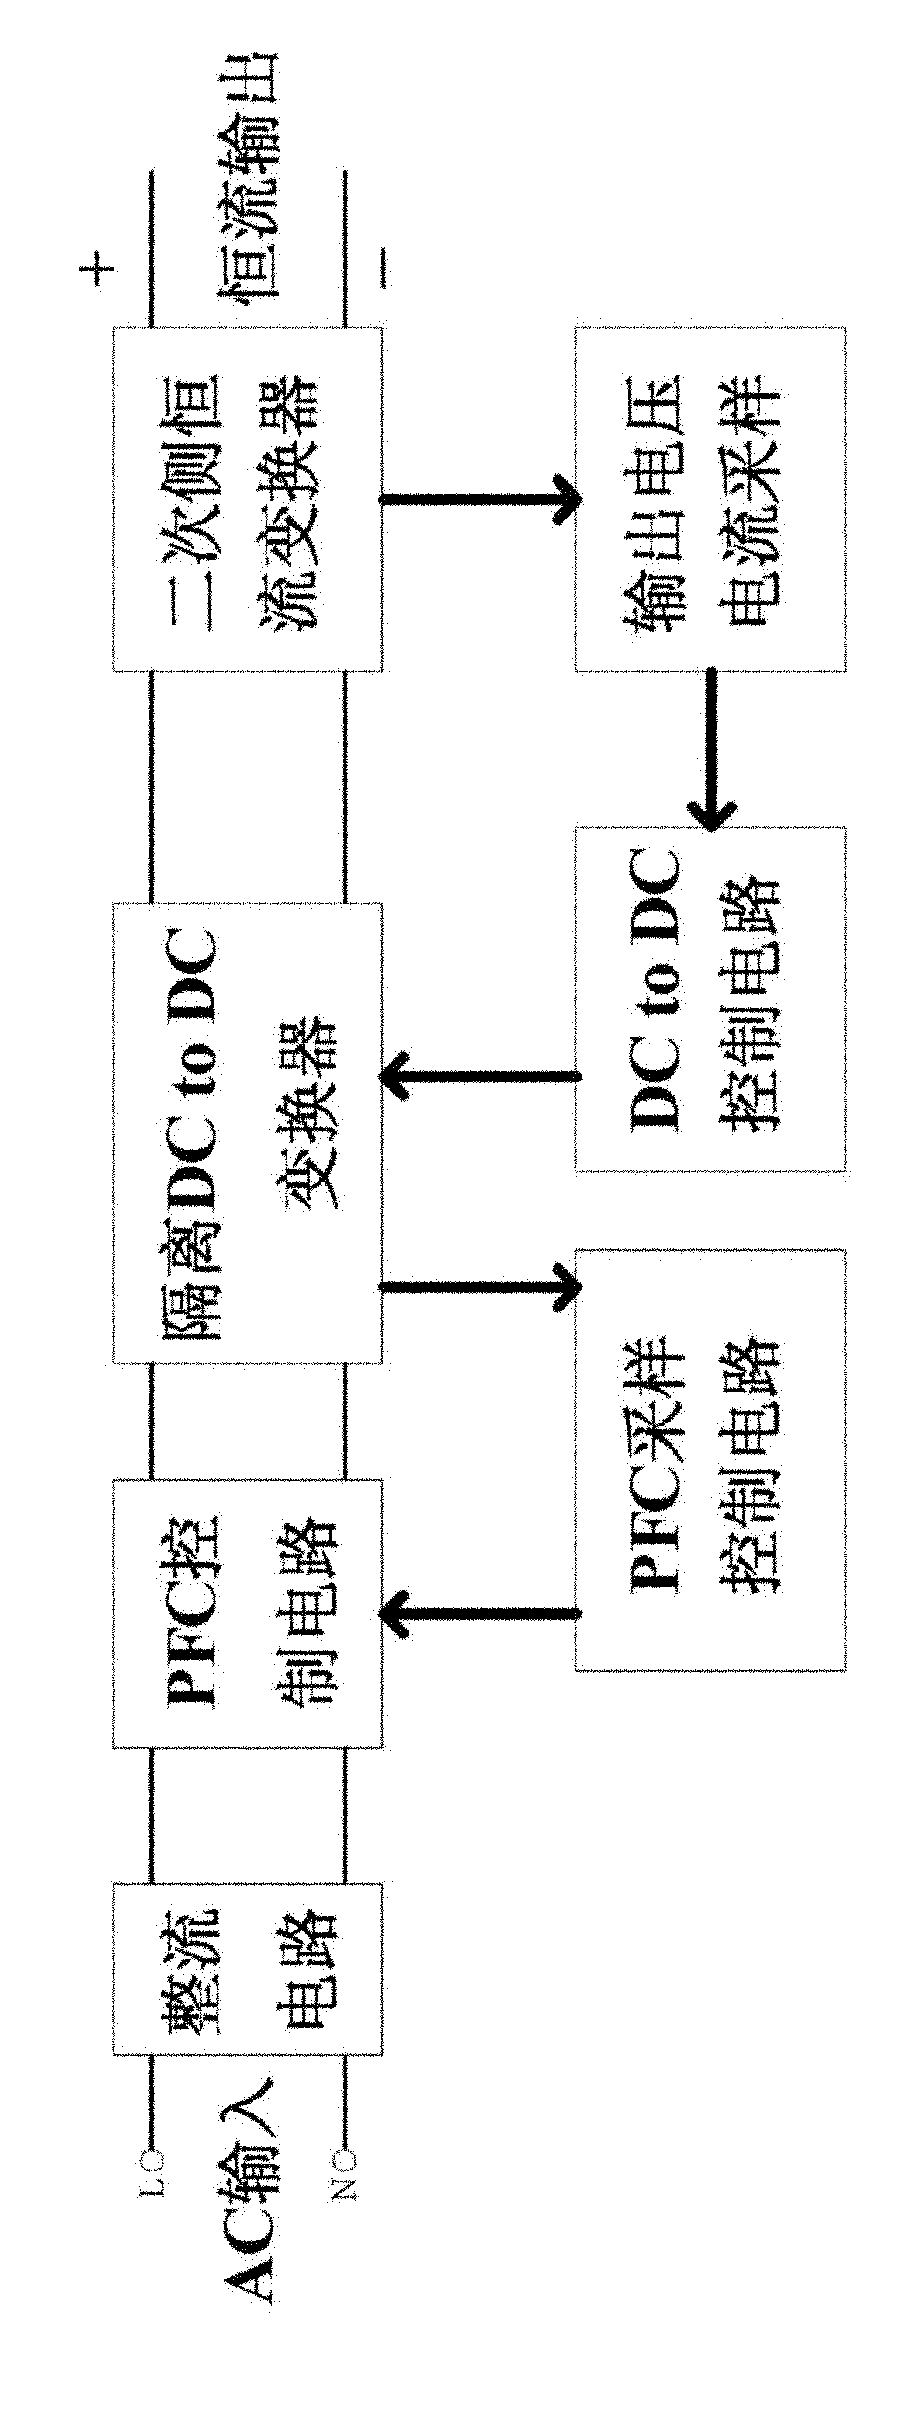 Power supply system for centralized control of LED (light emitting diode) street lamps